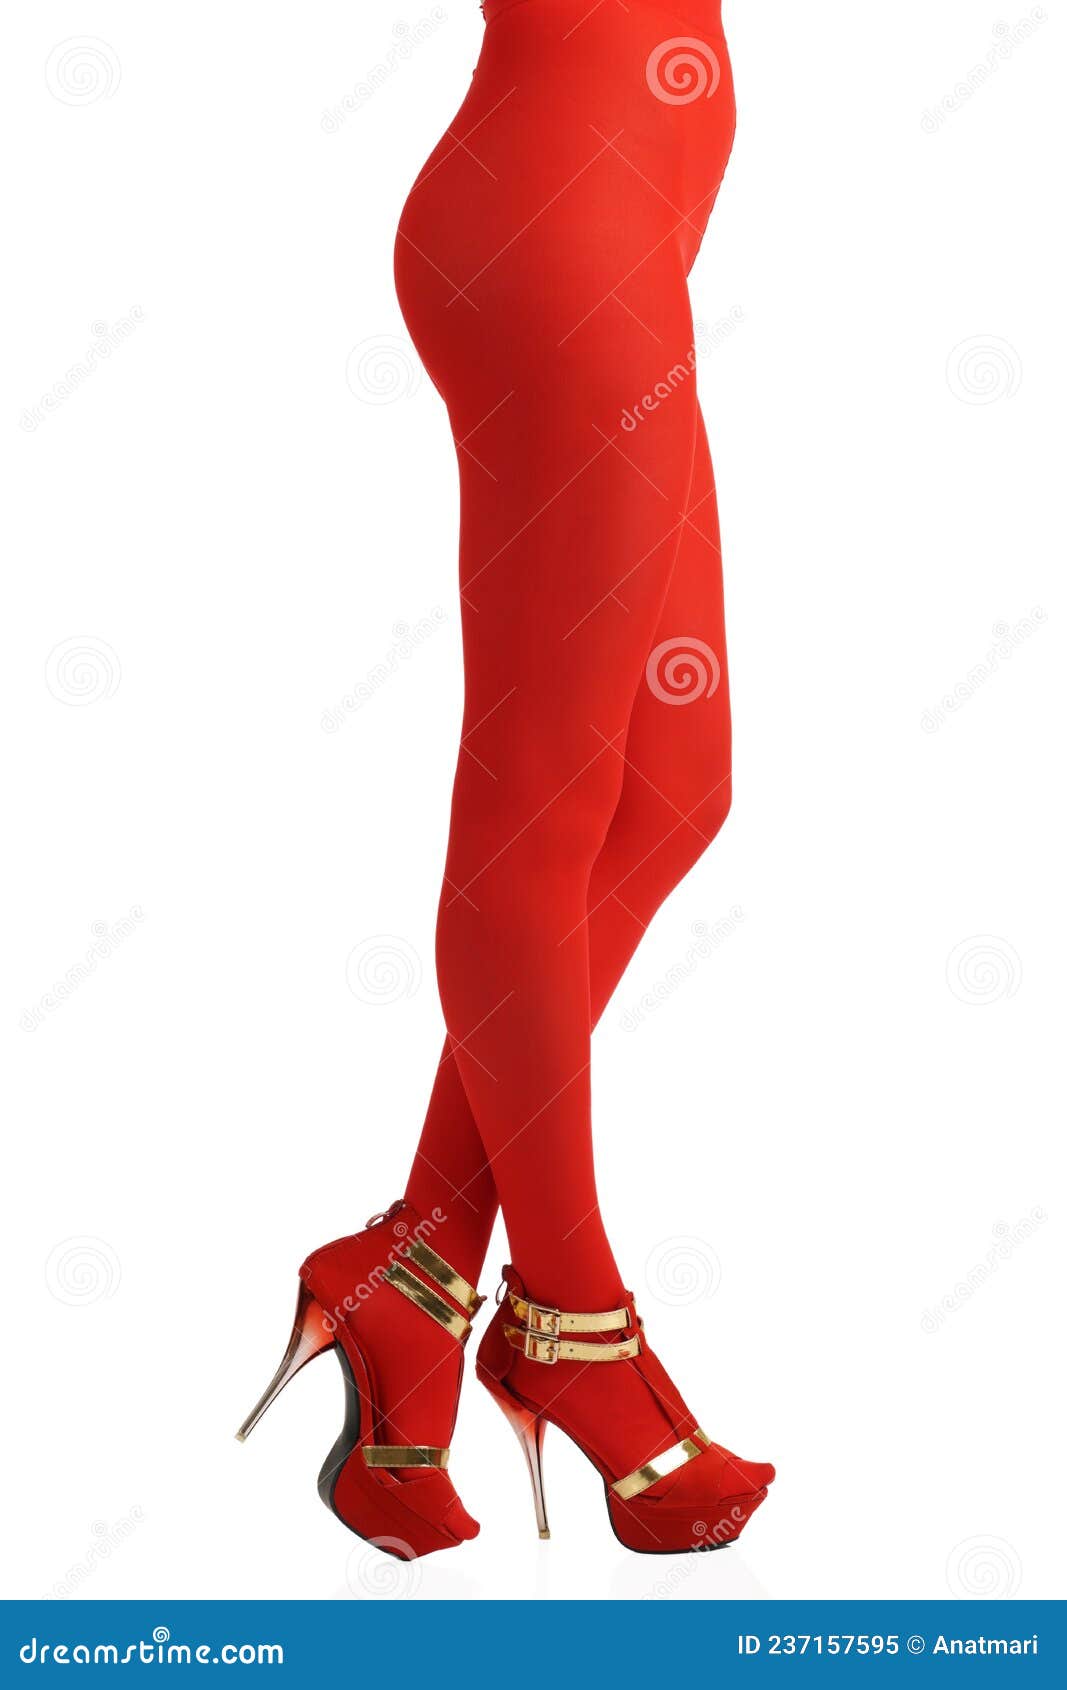 https://thumbs.dreamstime.com/z/side-view-sexy-female-legs-one-leg-back-wearing-red-nylon-tights-stip-high-heels-isolated-white-background-slim-237157595.jpg